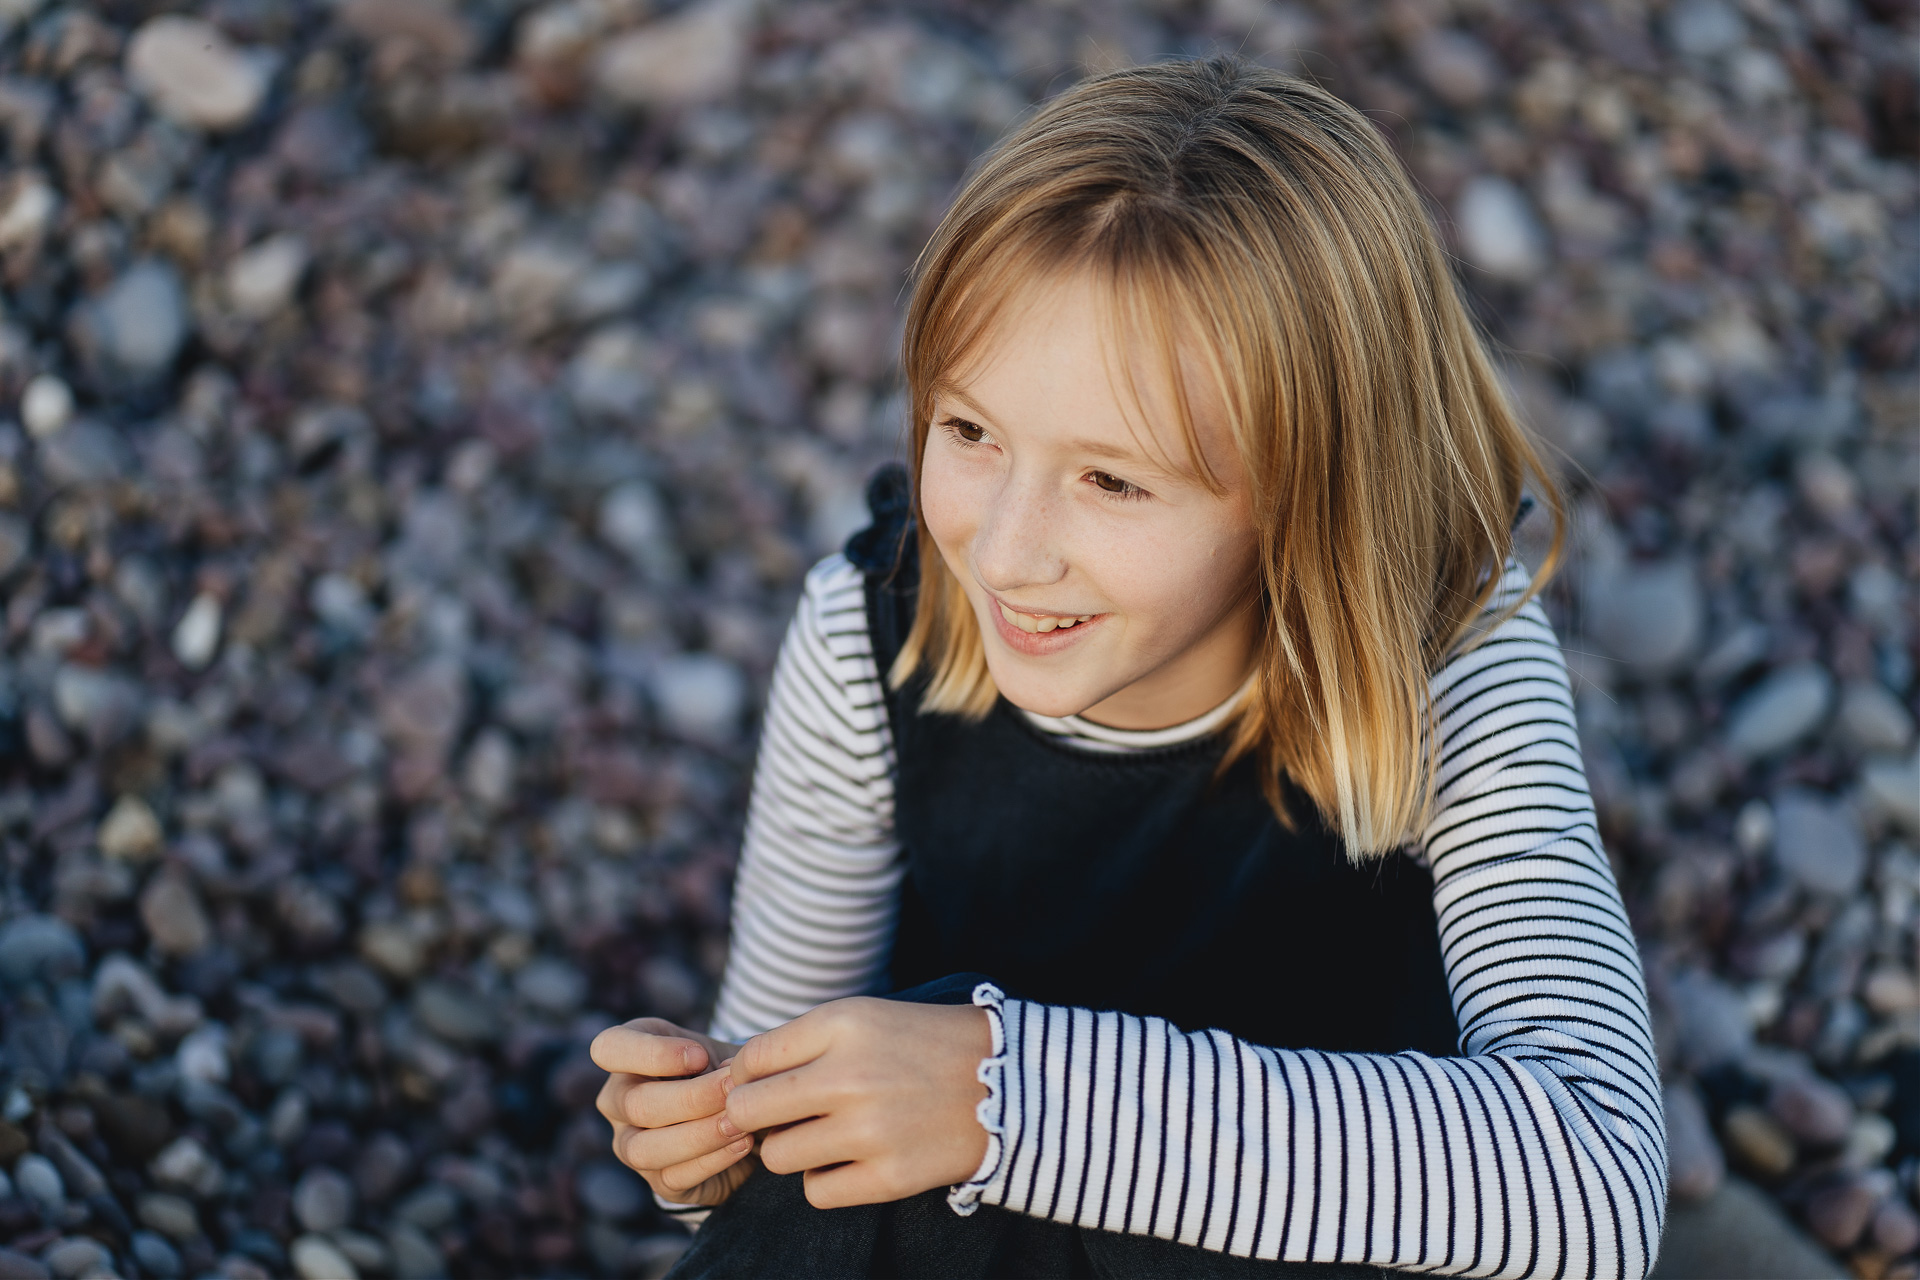 A young girl smiling on the beach